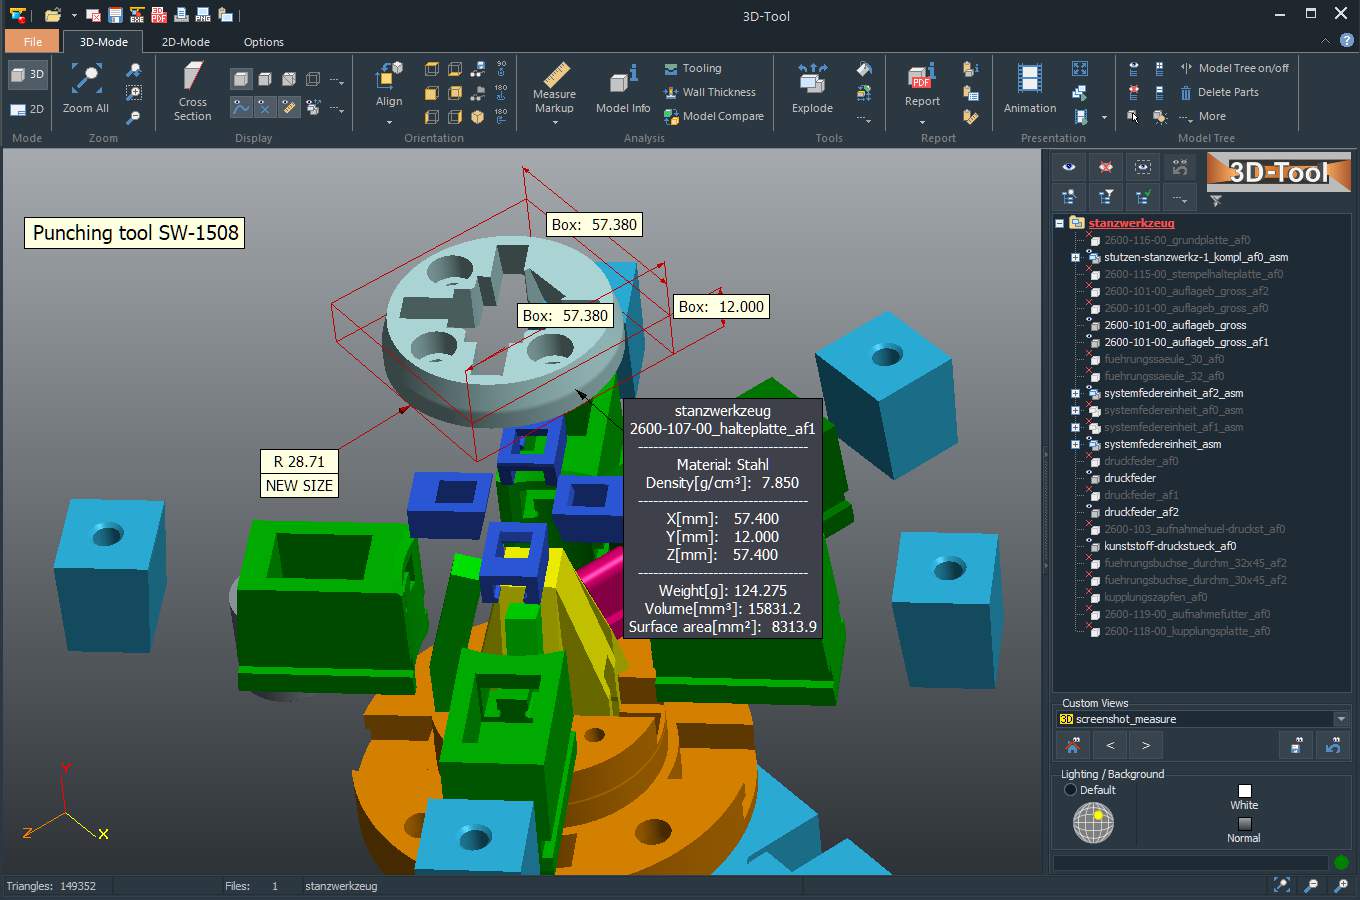 The 3D-Tool Viewer offers measuring tools for distances, angles, radii, wall thicknesses and free spaces. The viewer calculates the size of surfaces, cut surfaces, contour lengths, the center of mass as well as the minimum bounding box of parts.